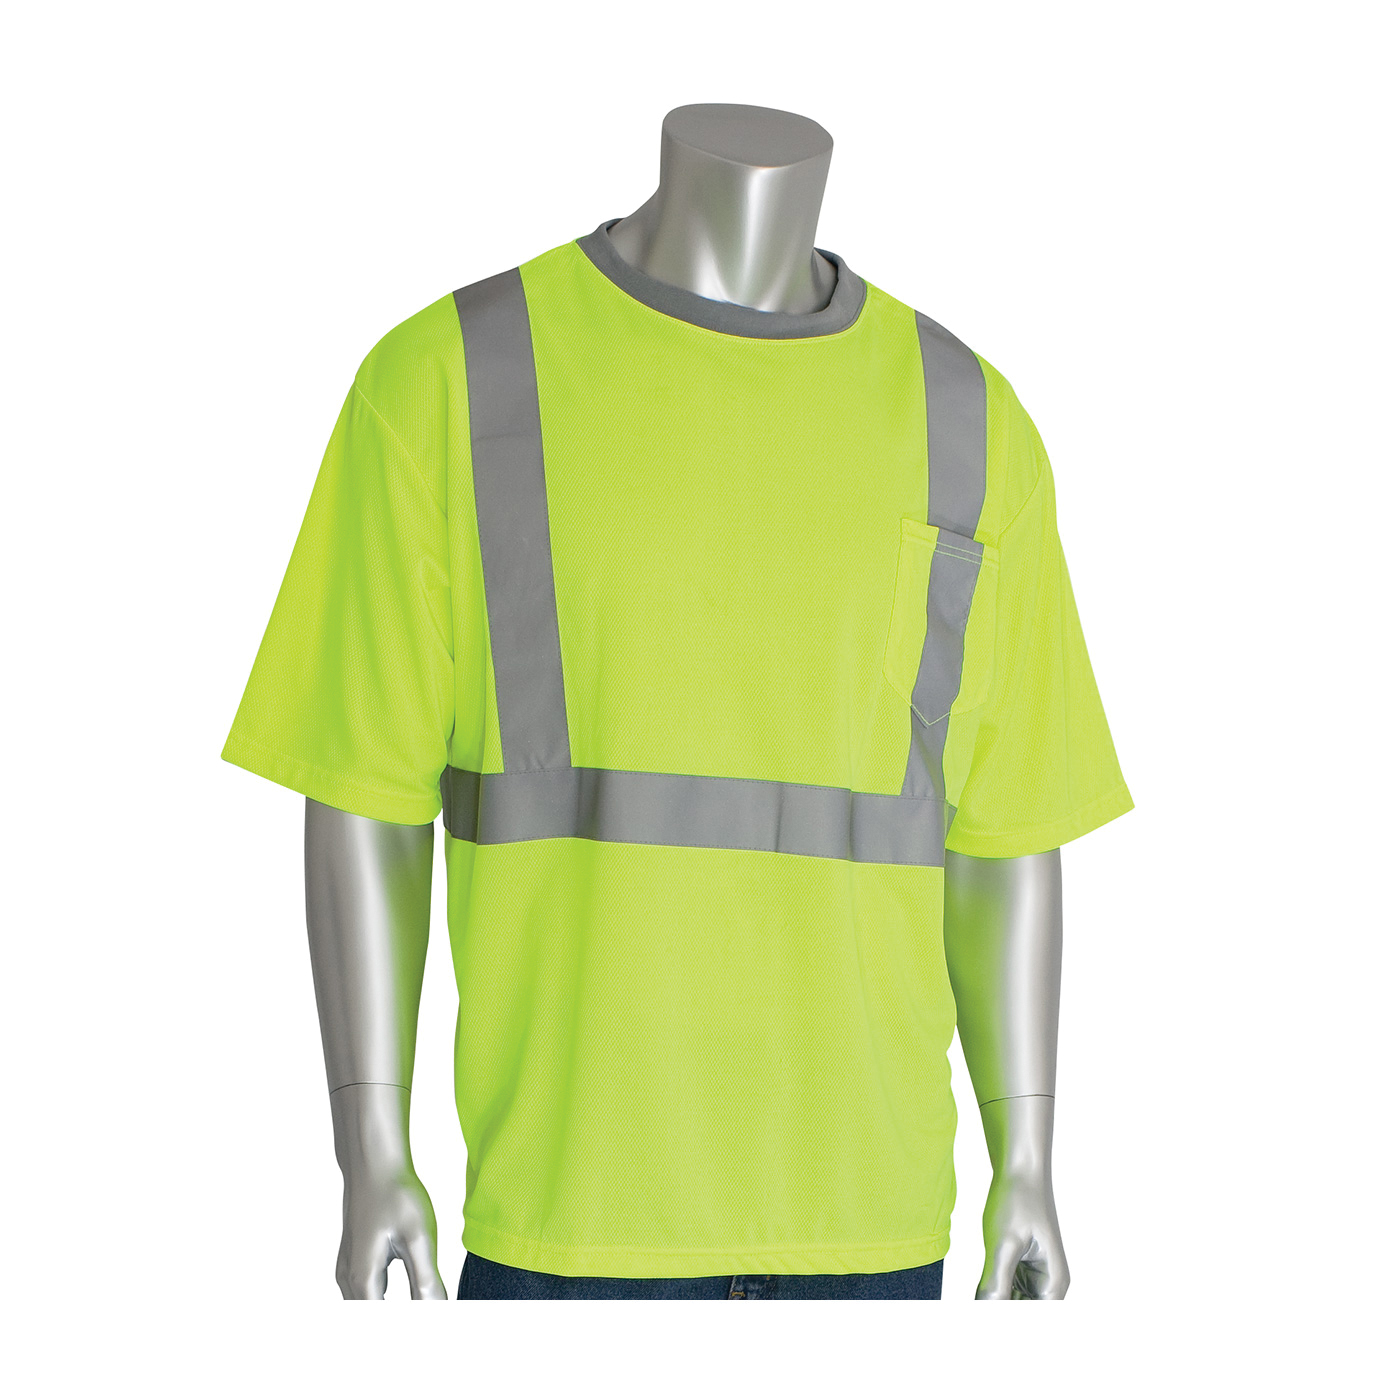 PIP® 312-1200-LY/S Short Sleeve Crew Neck T-Shirt With Reflective, S, Hi-Viz Lime Yellow, Bird's Eye Polyester, 27-1/2 in L